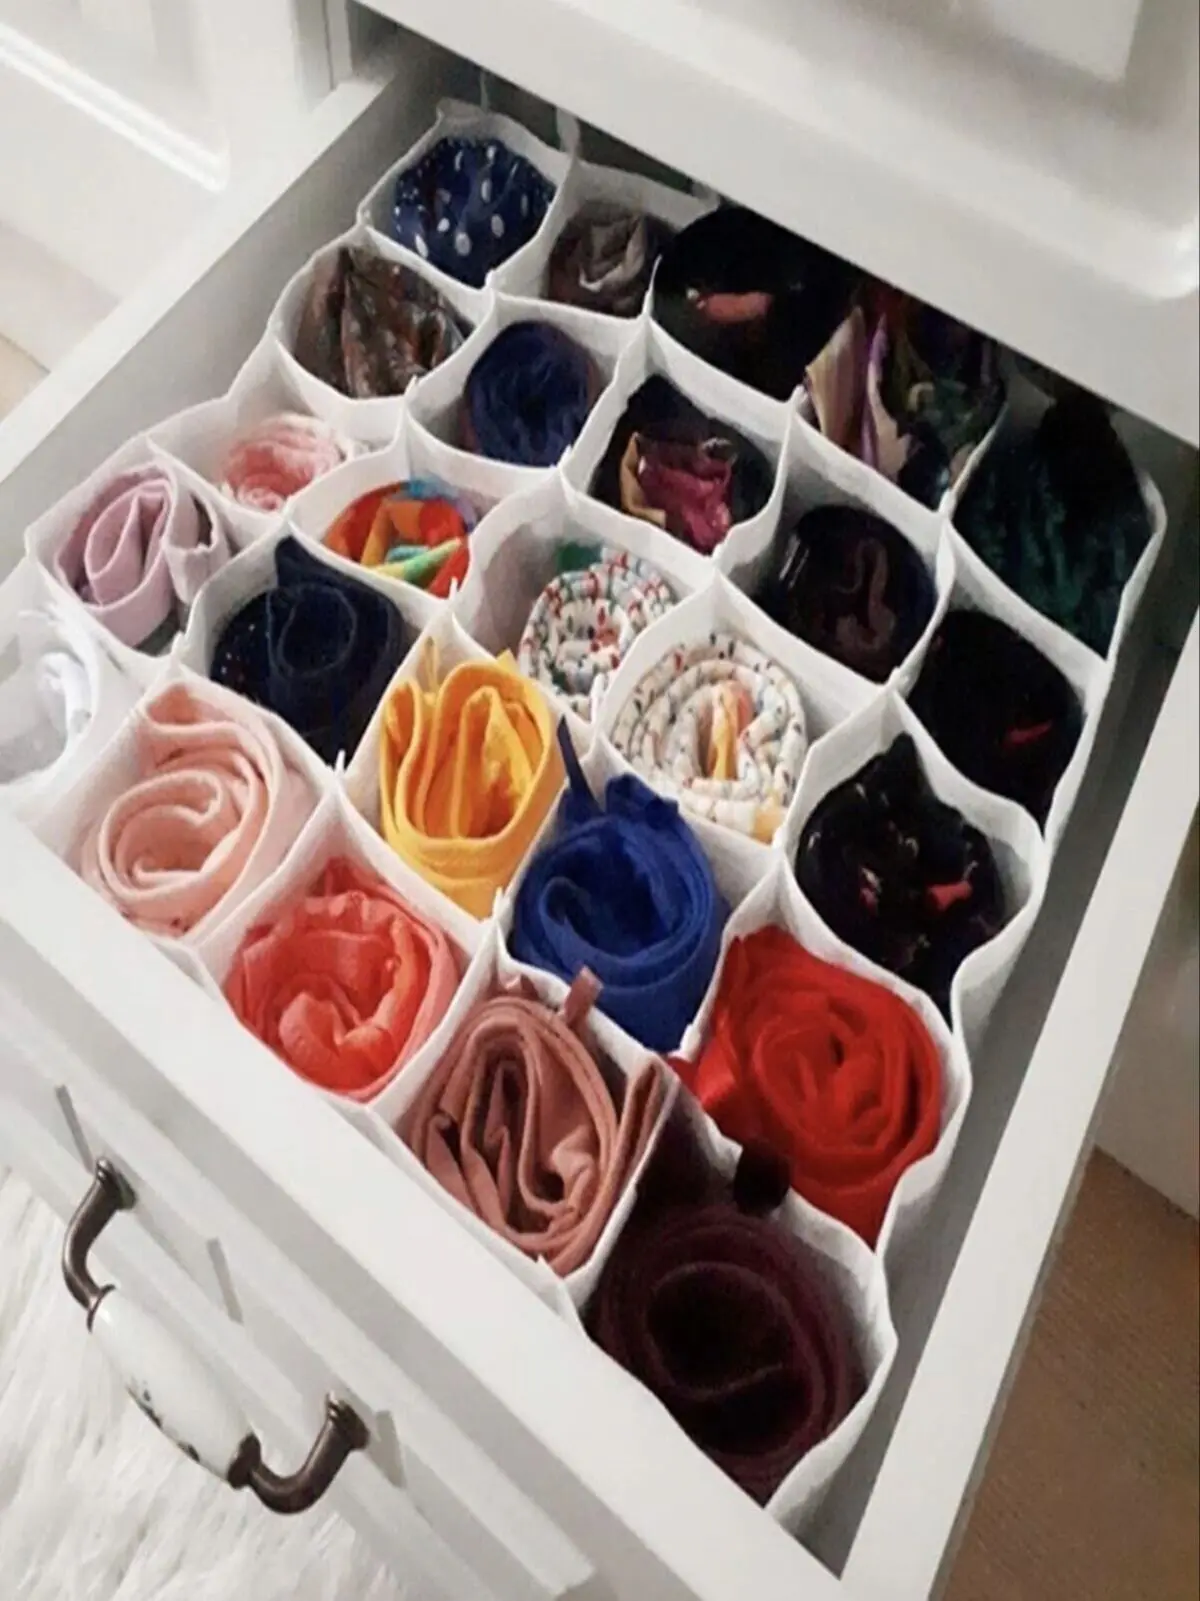 

Good Quality 30 Eye Large Drawer Organizer 42X35X10Cm Fabric Washable Storage Divider For Clothes Toys Socks Etc. Made In Turkey